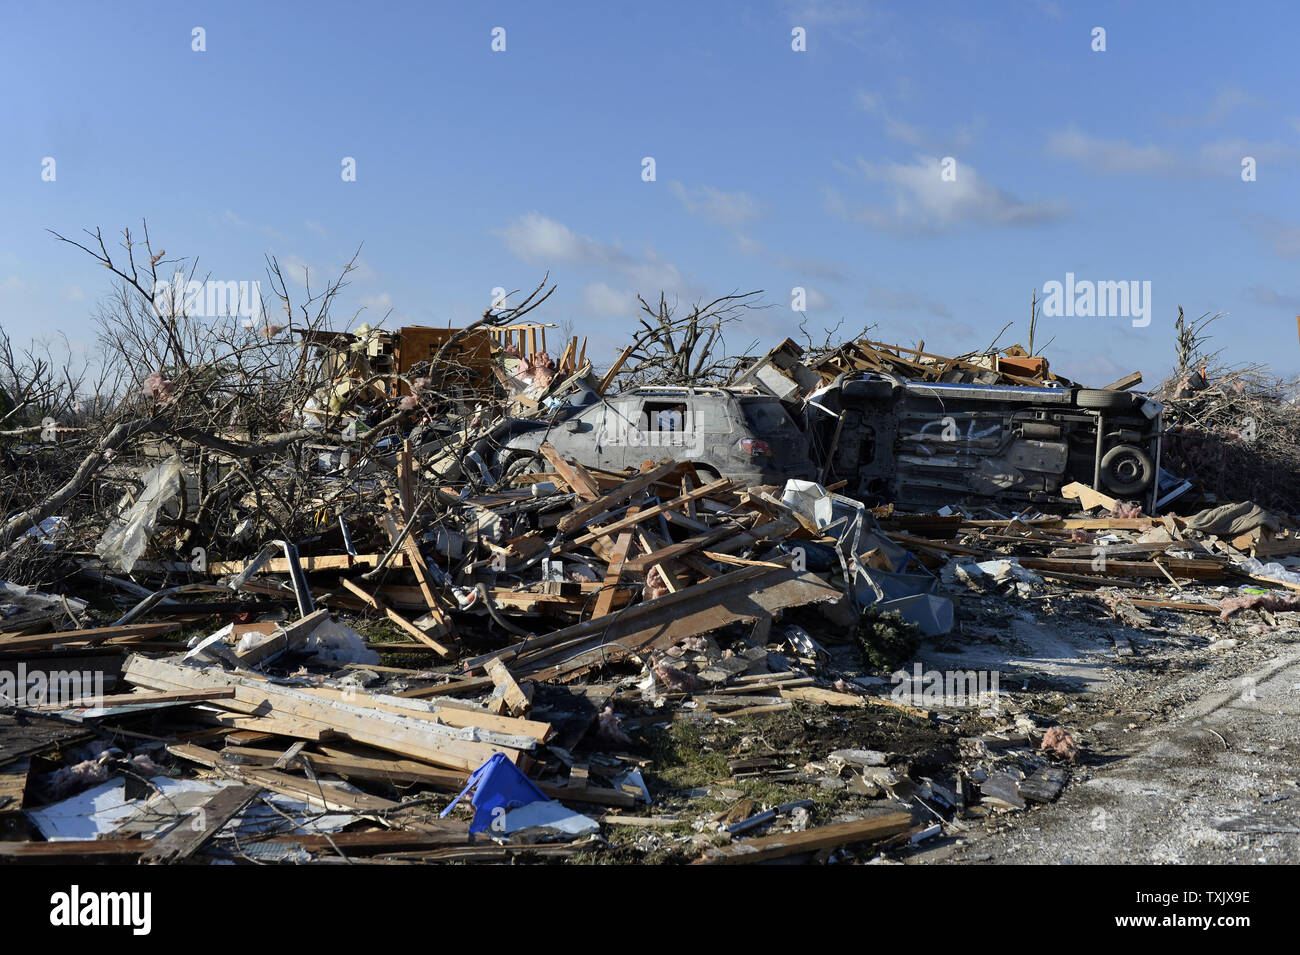 Debris is left in the aftermath of a tornado in Washington, Illinois on November 18, 2013. Six people died and hundreds of homes were destroyed in Illinois as 81 tornadoes were sighted on November 17 throughout 12 midwest states including the EF4 tornado that struck Washington, Illinois.     UPI/Brian Kersey.     UPI/Brian Kersey Stock Photo